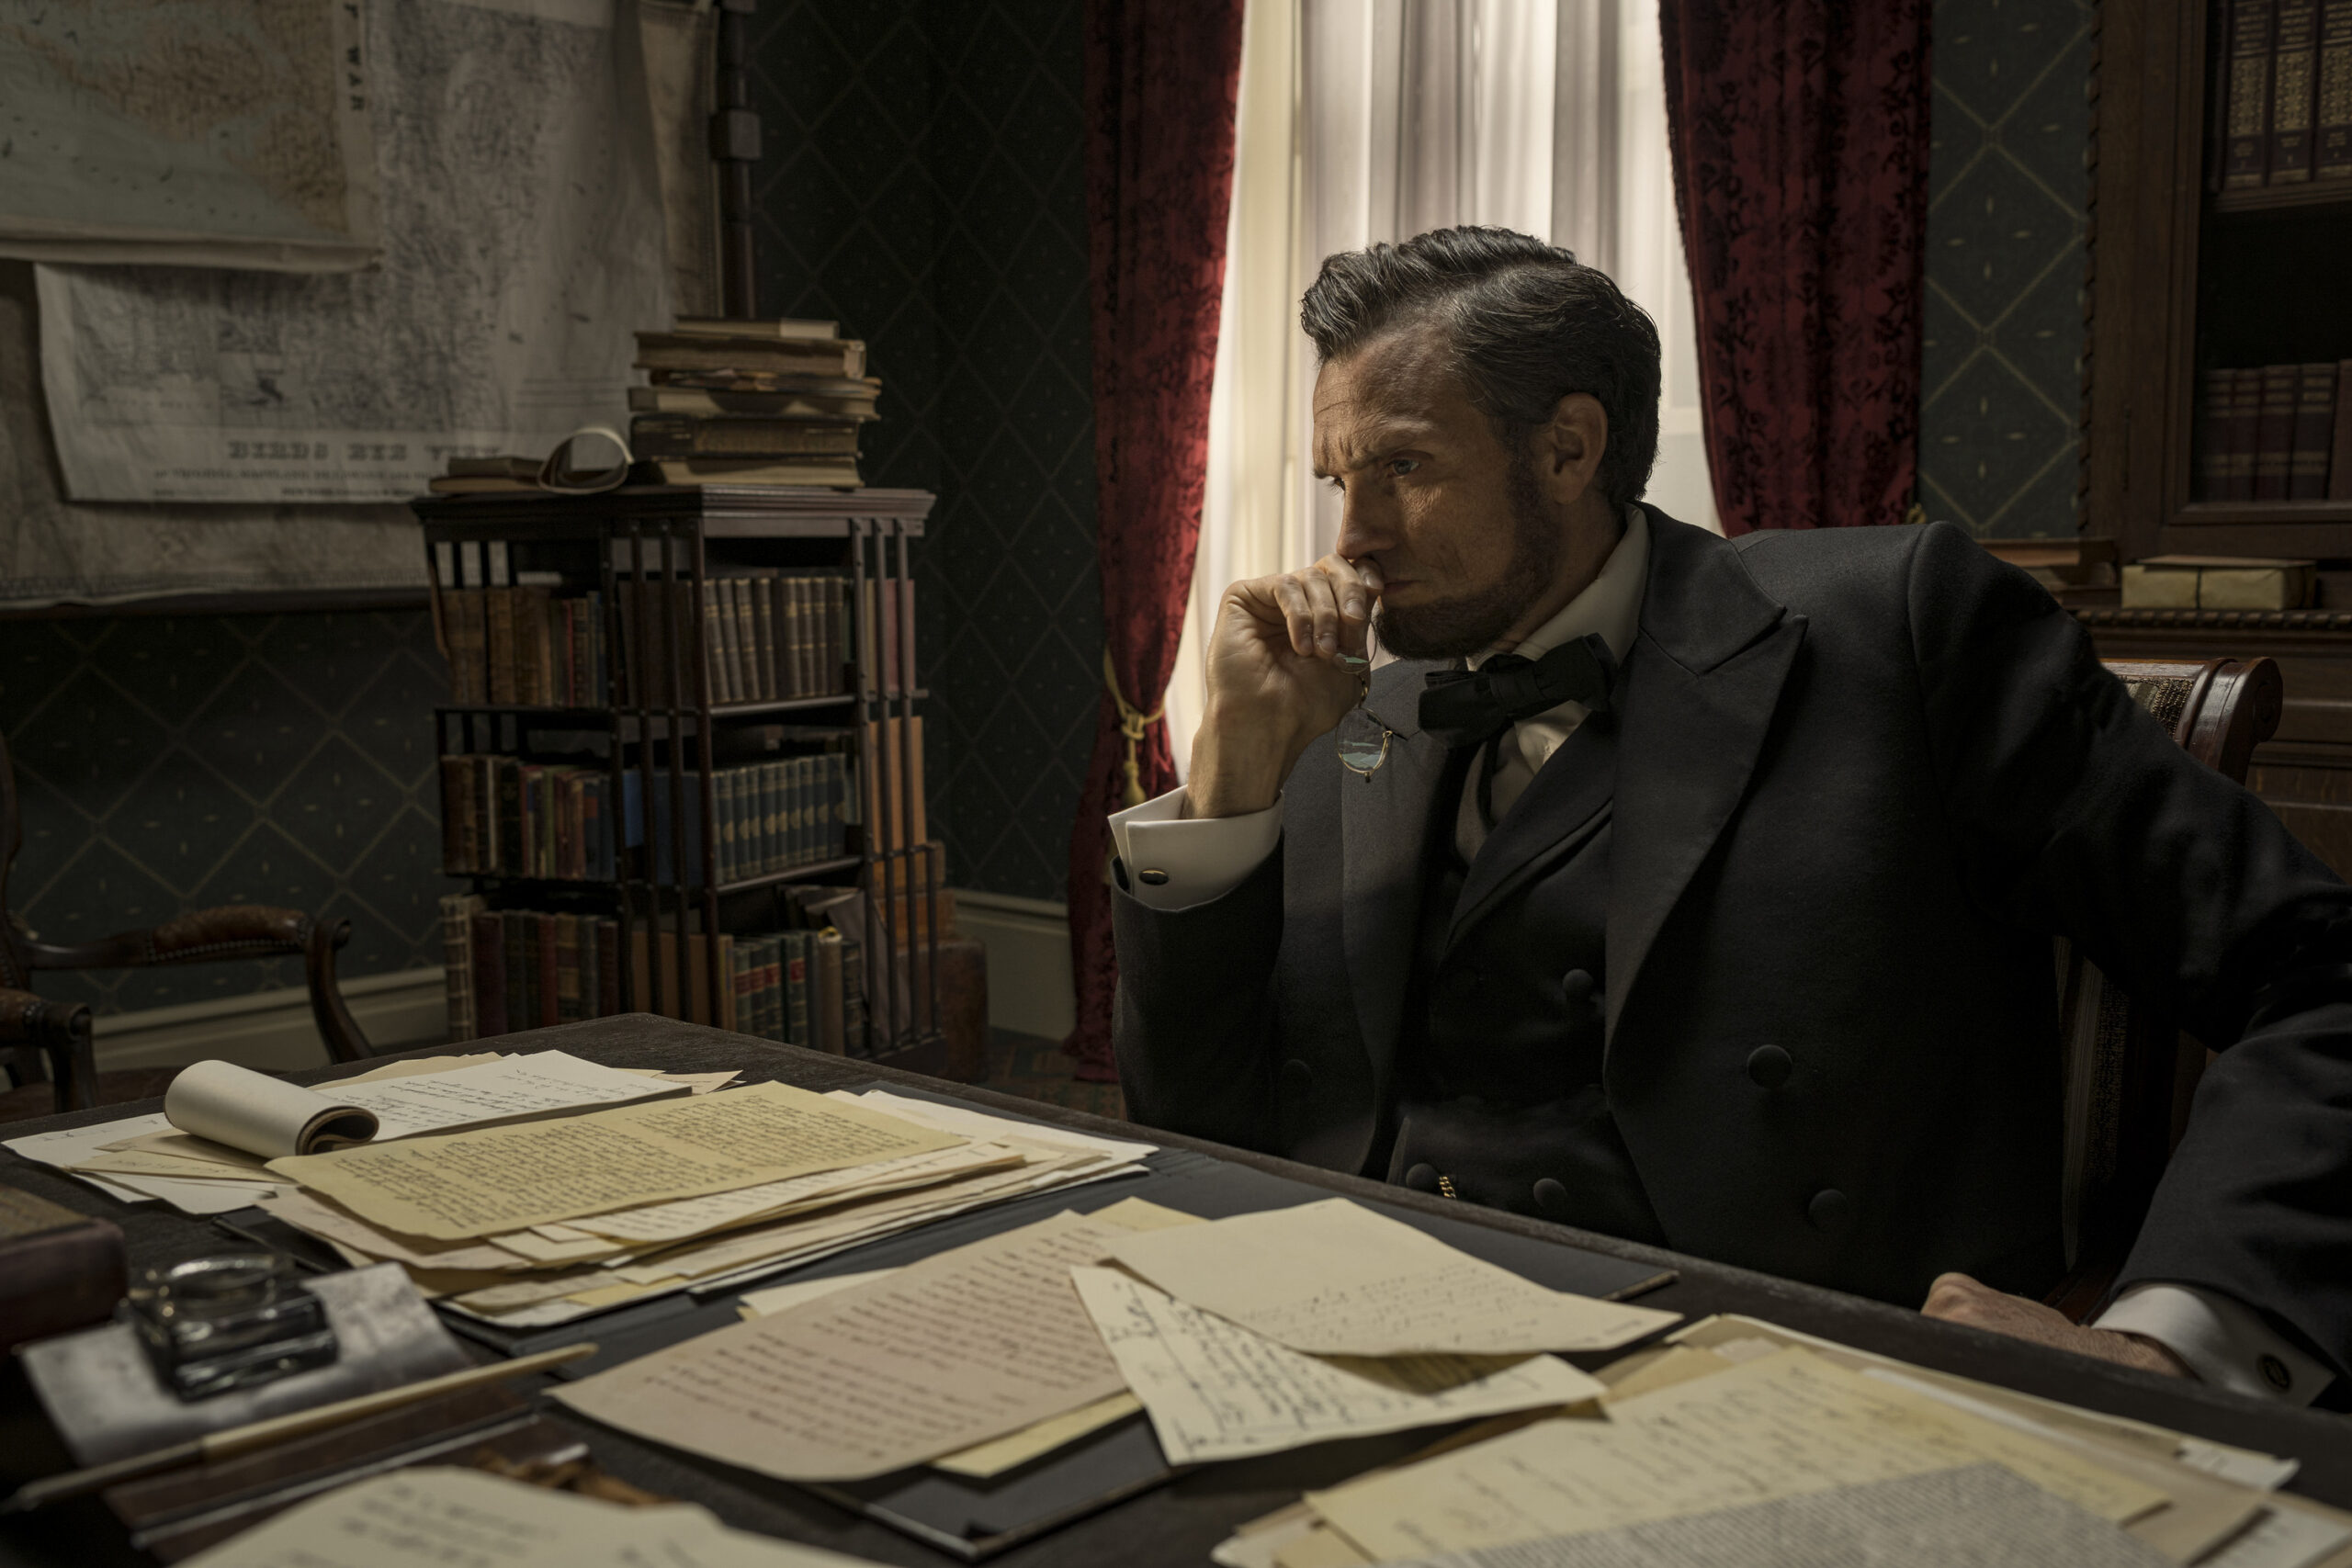 Abraham Lincoln (GRAHAM SIBLEY) in Abraham Lincoln.